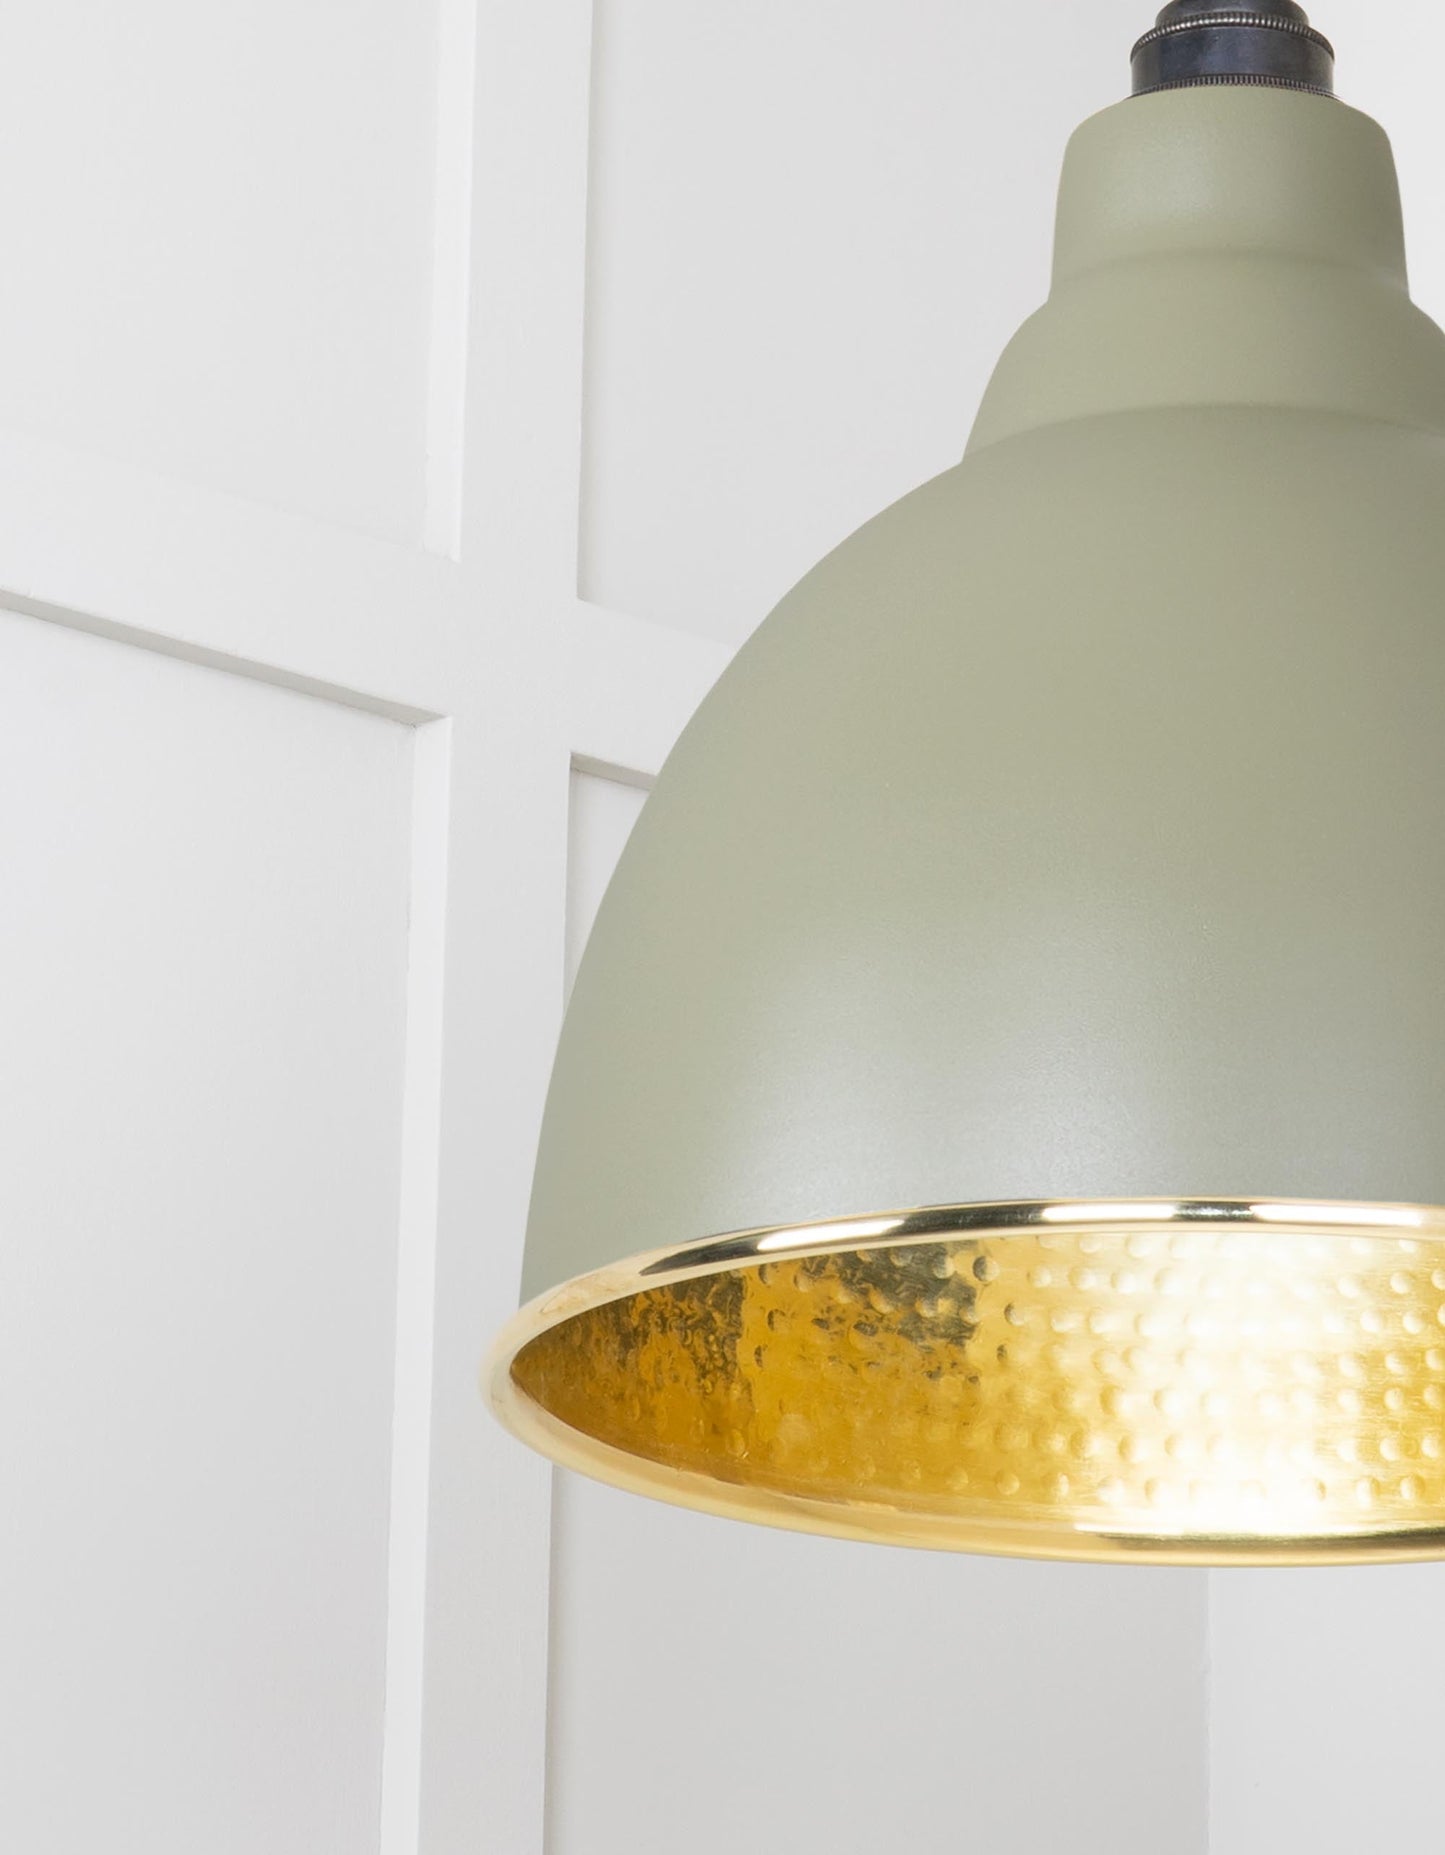 Hammered Brass Brindley Pendant Light Tump, Detailed close up view of pendant.